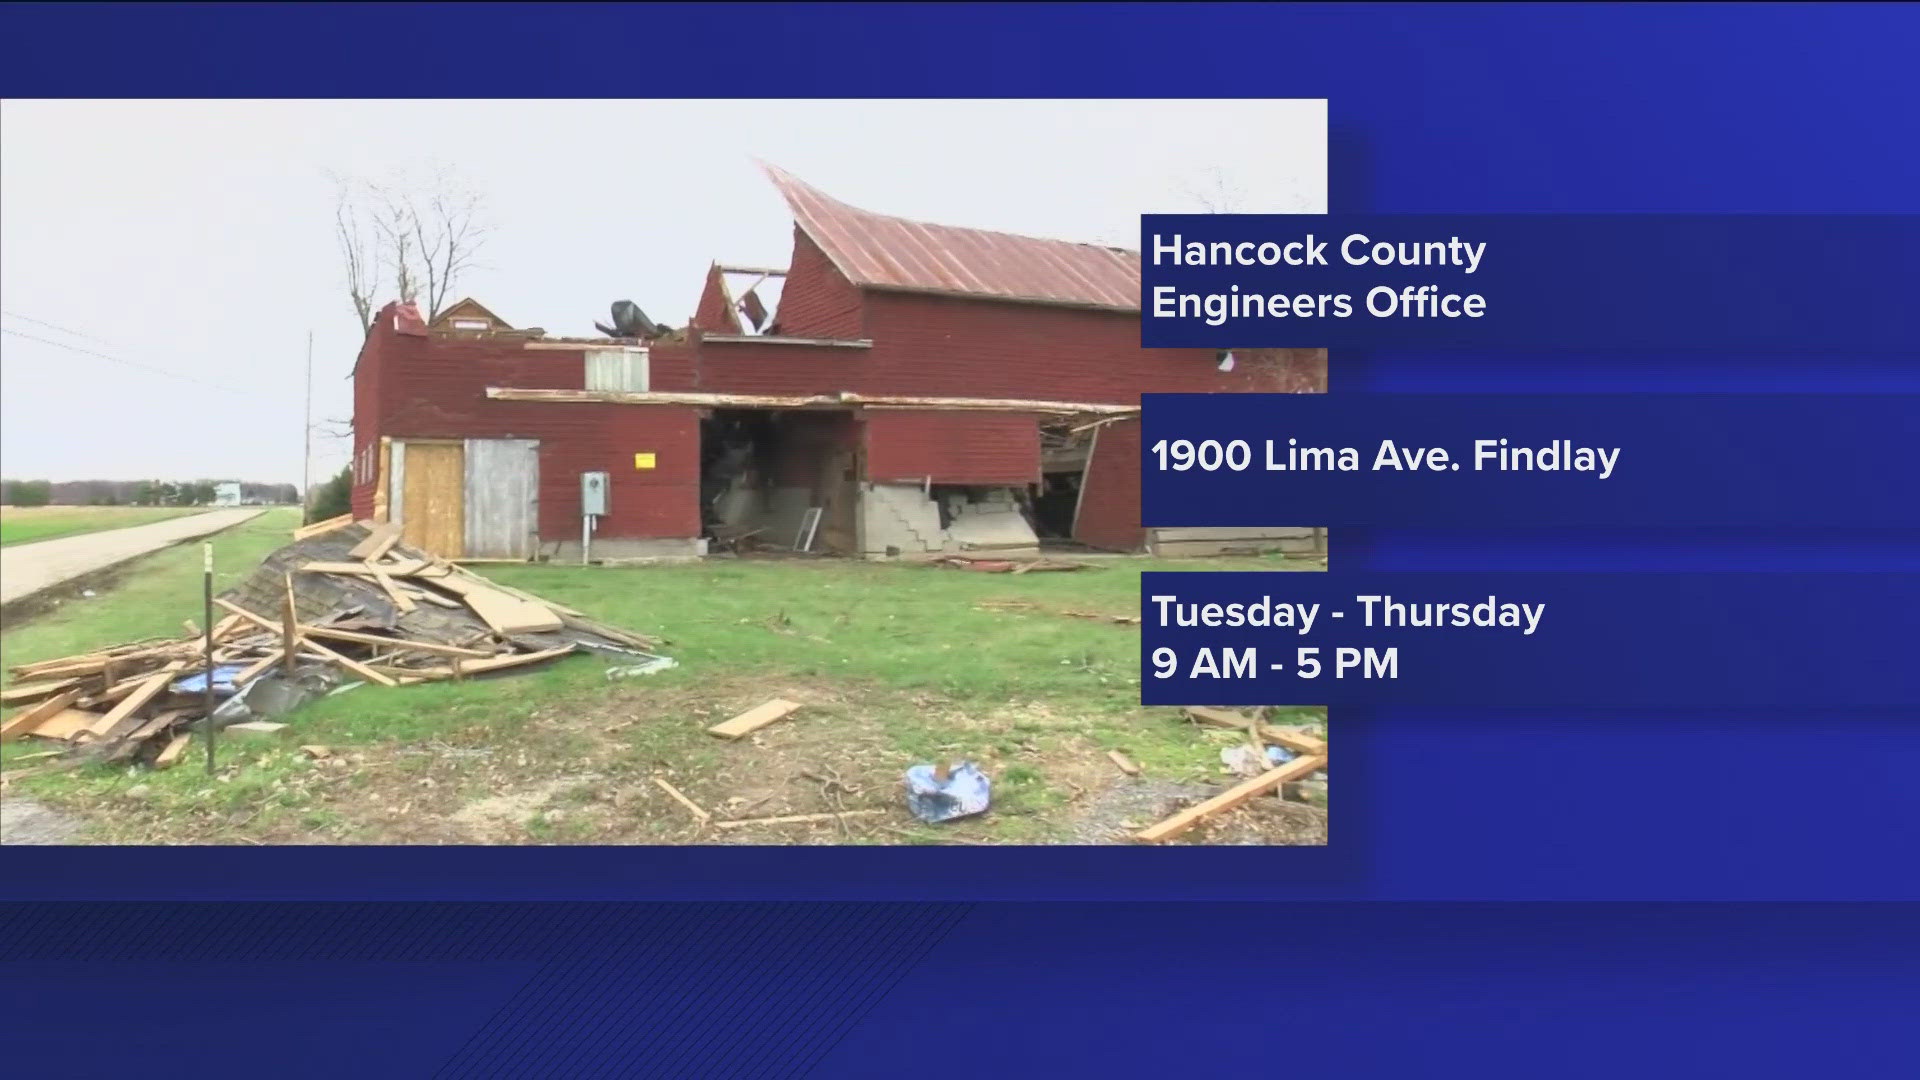 The recovery centers are stationed in Darke, Delaware, Hancock and Miami counties to help residents recover from the tornadoes that touched down March 14.